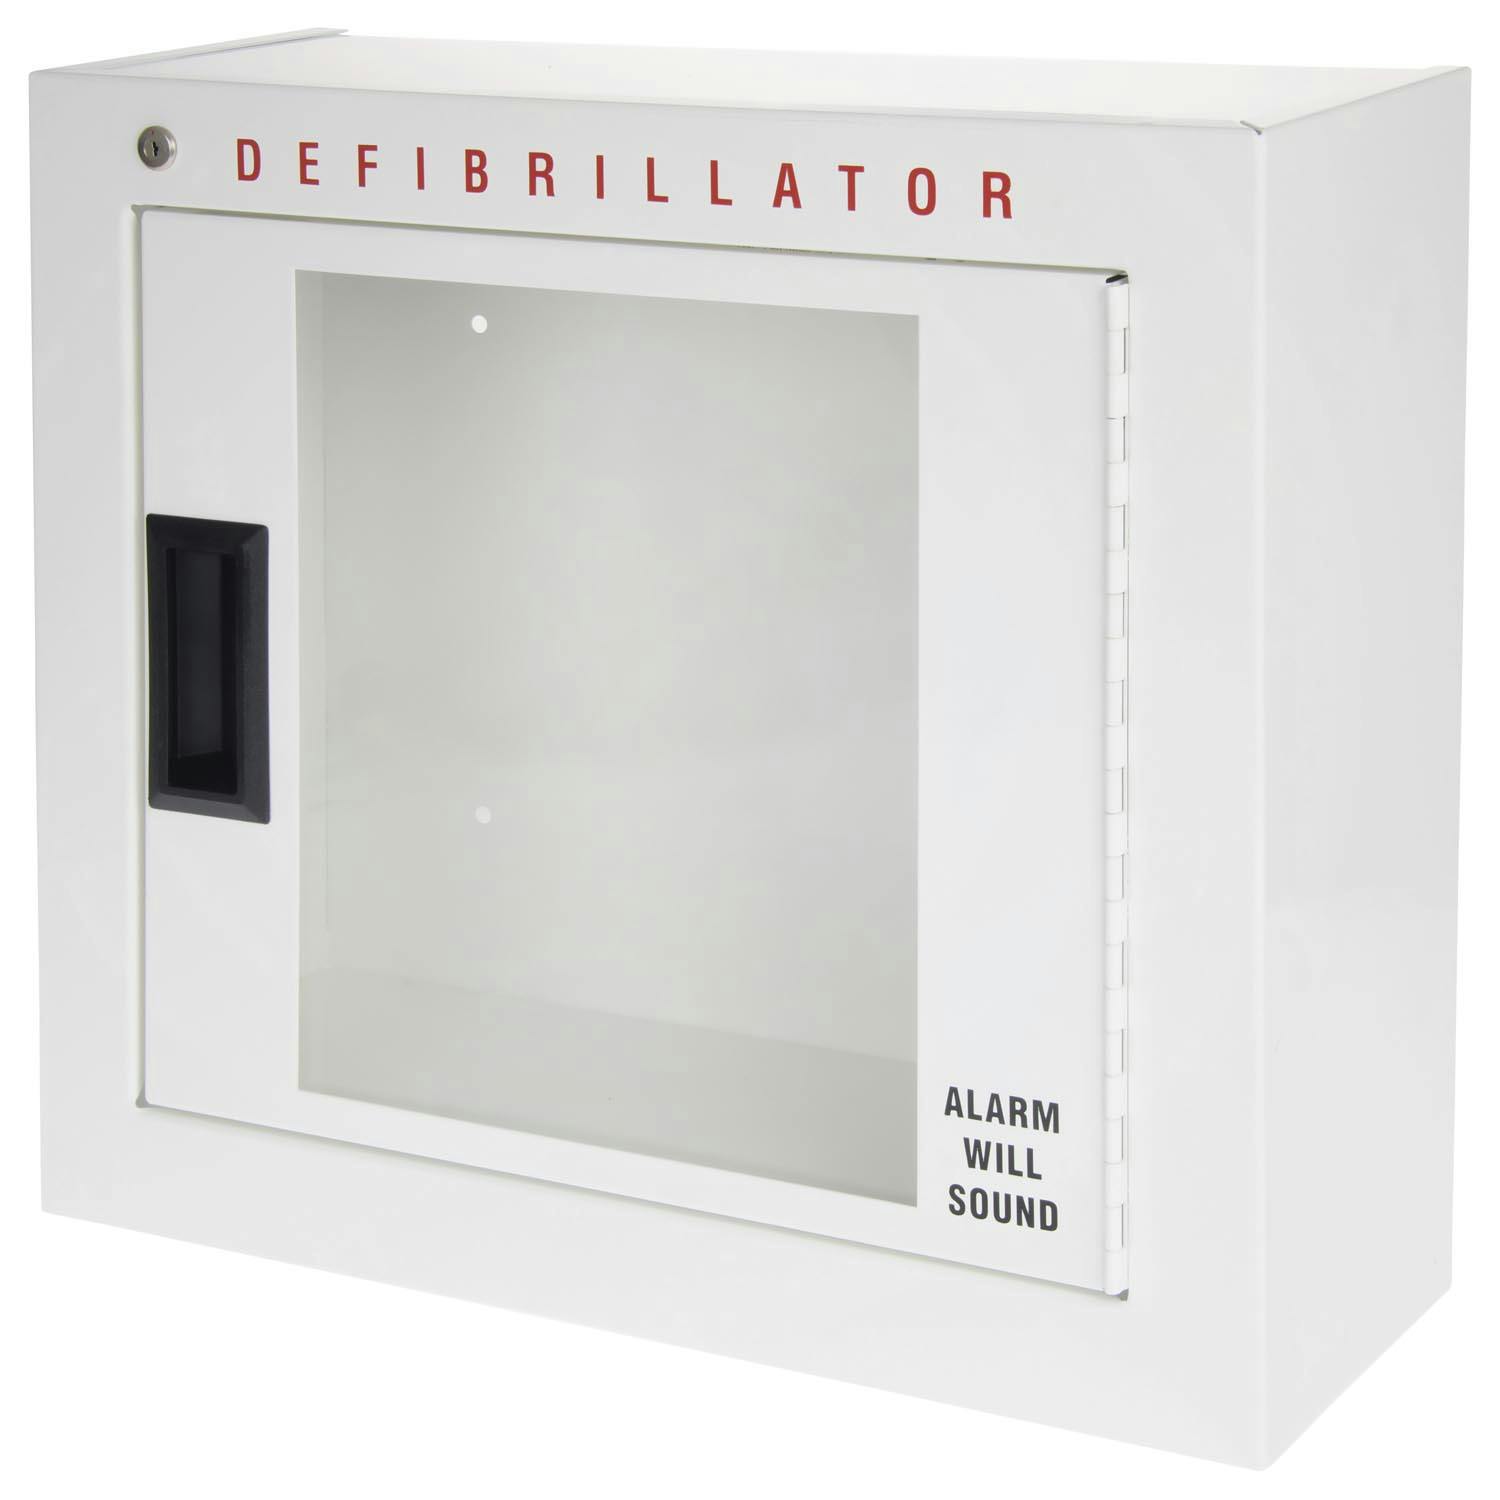 MEDIQ Defib Cabinet-Suits Hs1 And Frx